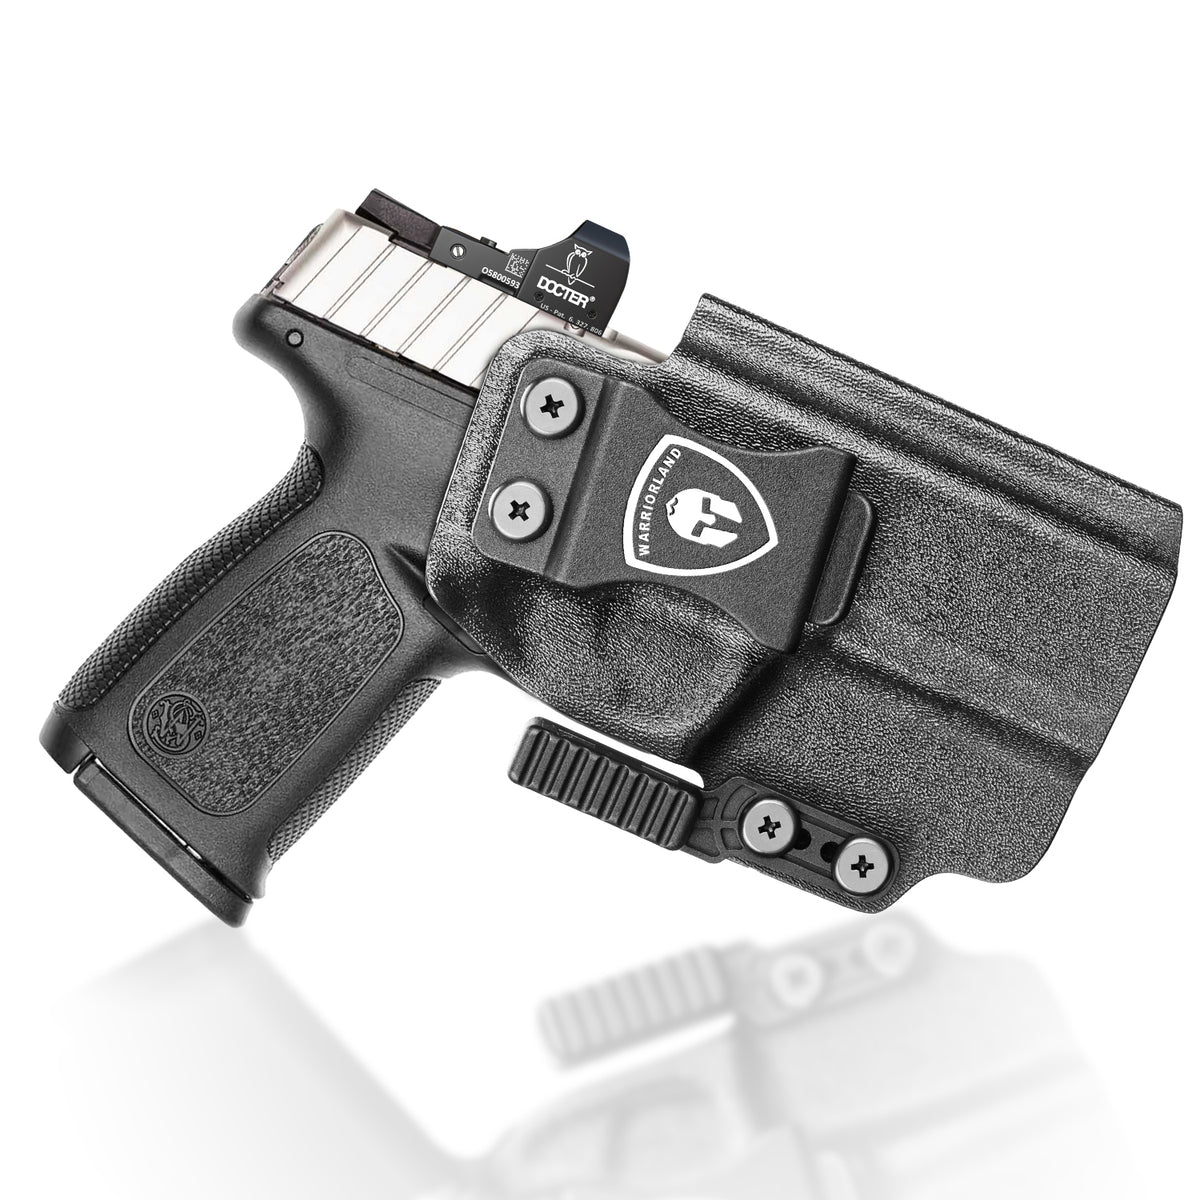 IWB Kydex Holster with Claw Attachment and Optic Cut Fit Smith & Wesson SD9VE & SD40VE Pistol, Inside Waistband Appendix Carry SD9 VE Holster, Adj. Cant & Retention, Right Hand|WARRIORLAND